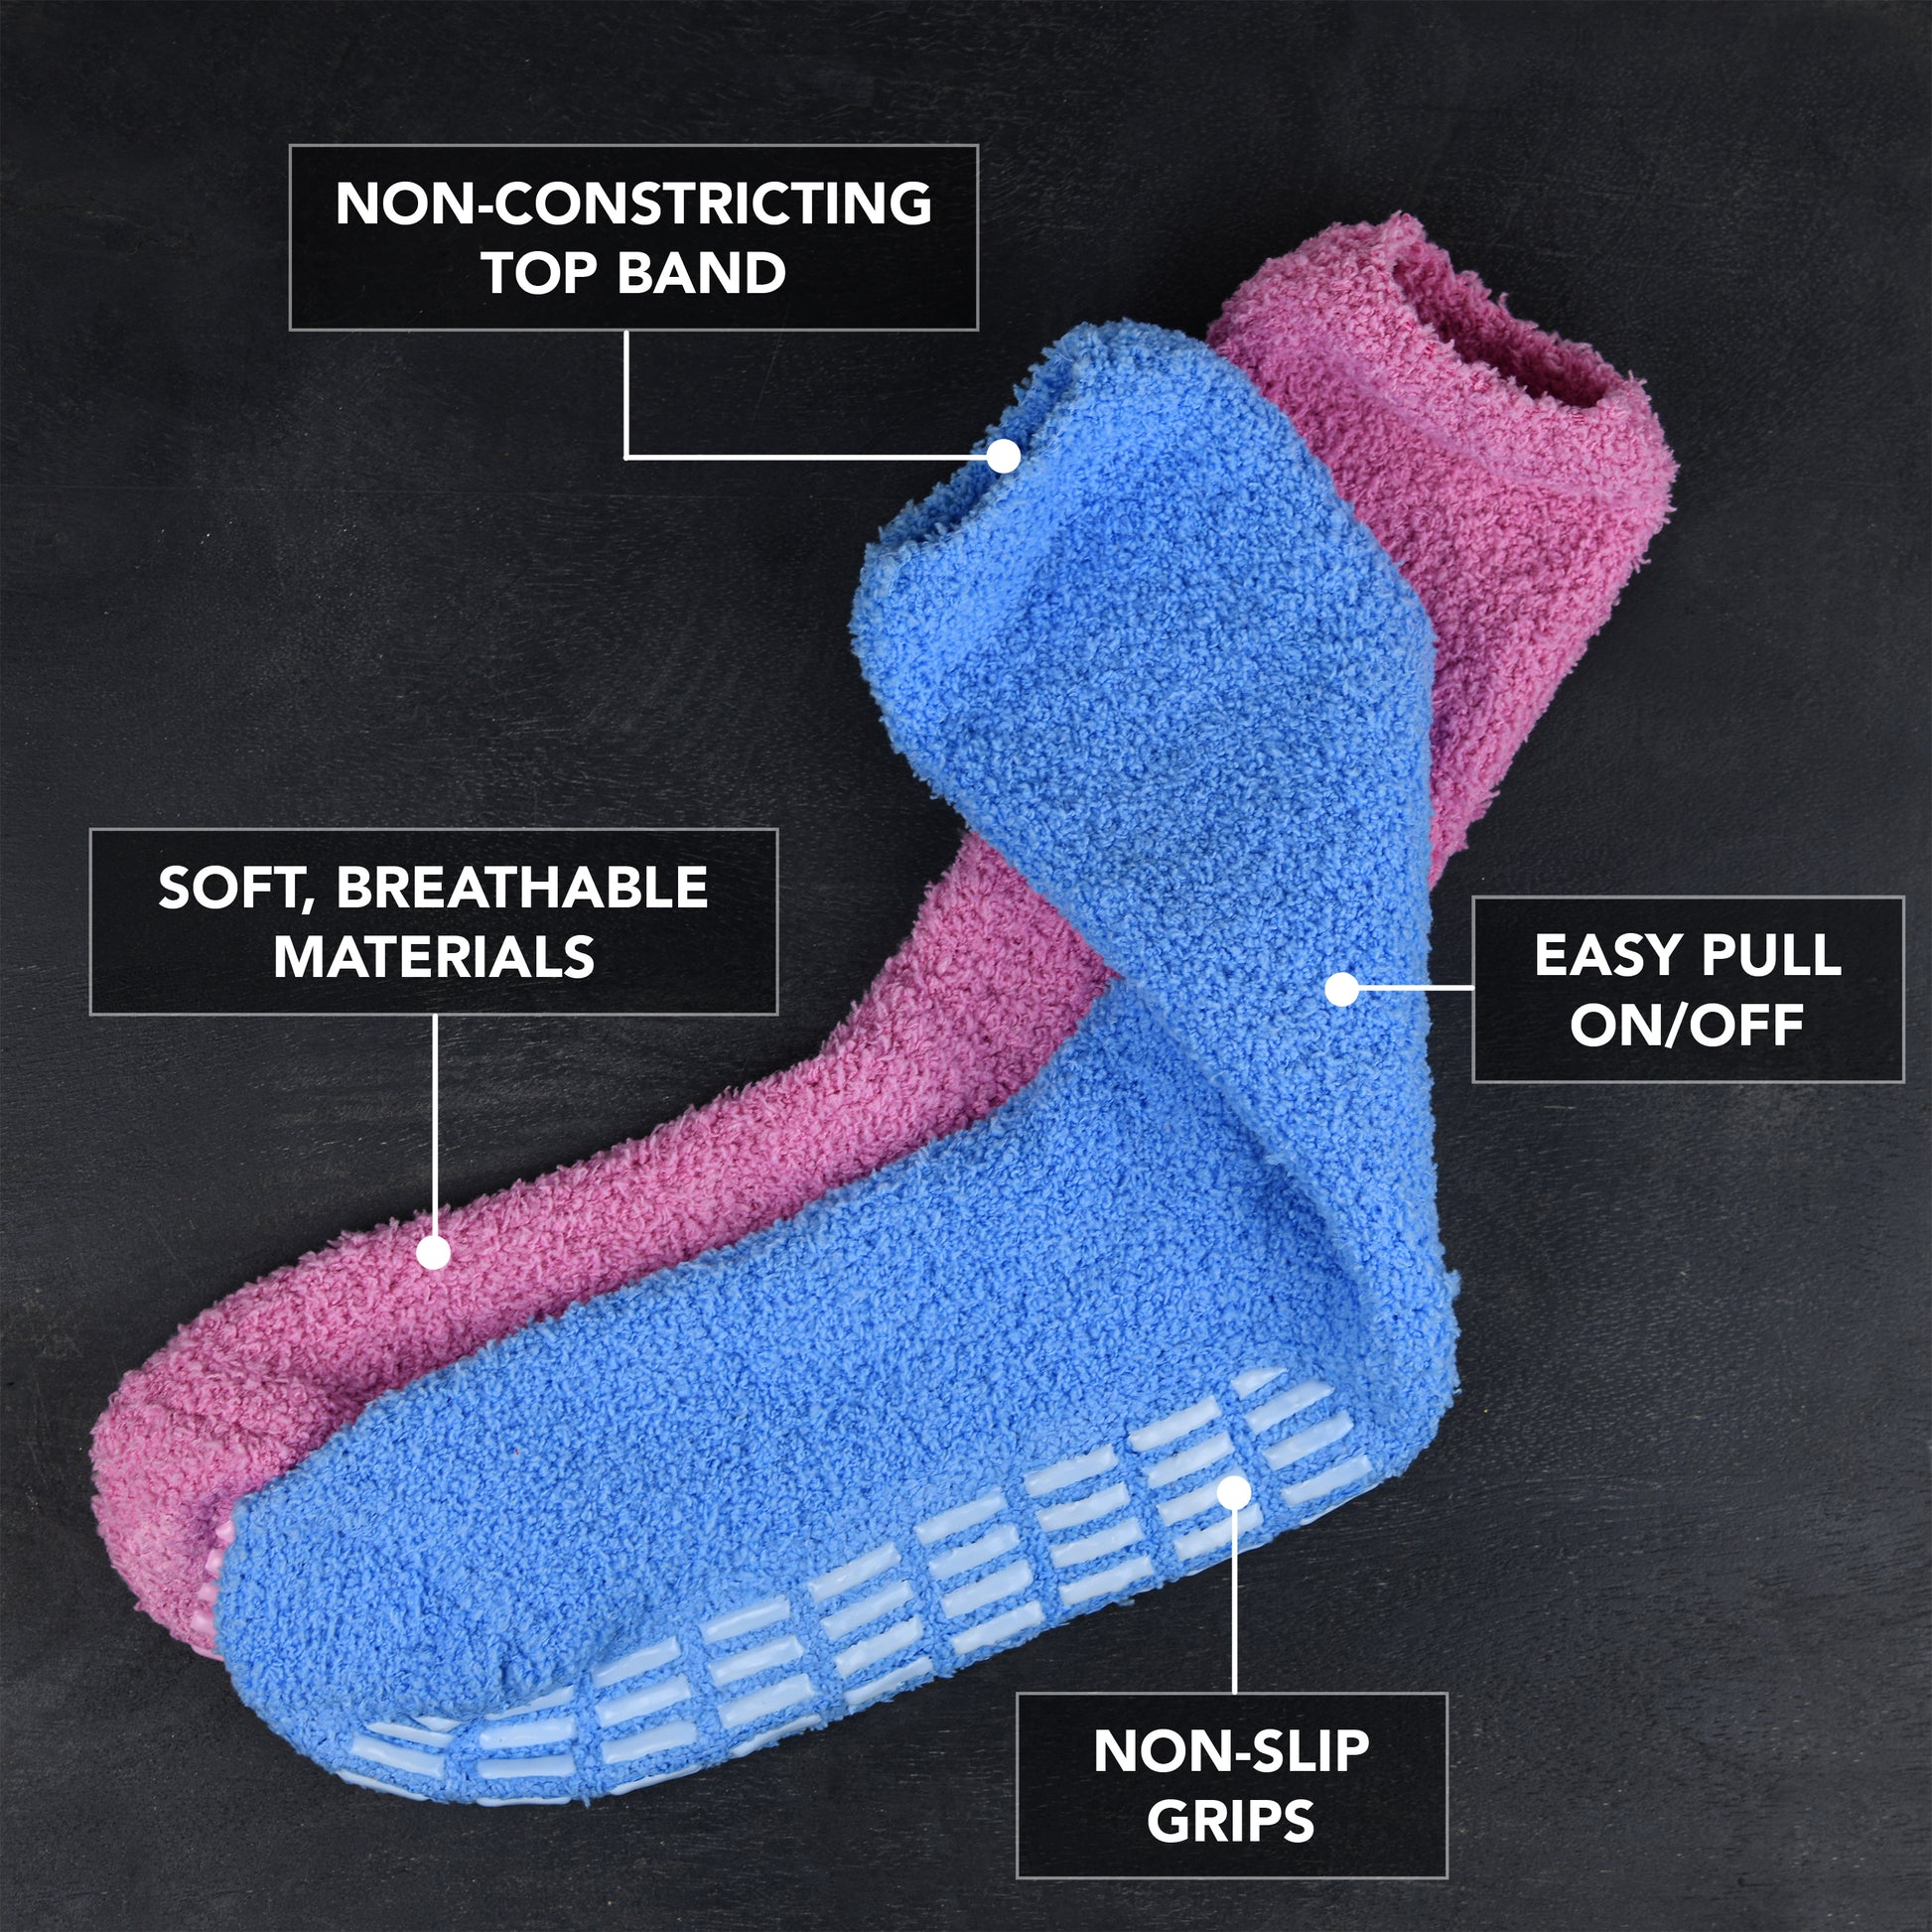 Fuzzy Slipper Socks for Women with Grippers Winter Cozy Thick Fleece Fluffy  Non Skid Warm Crew Comfort Soft Hospital Socks